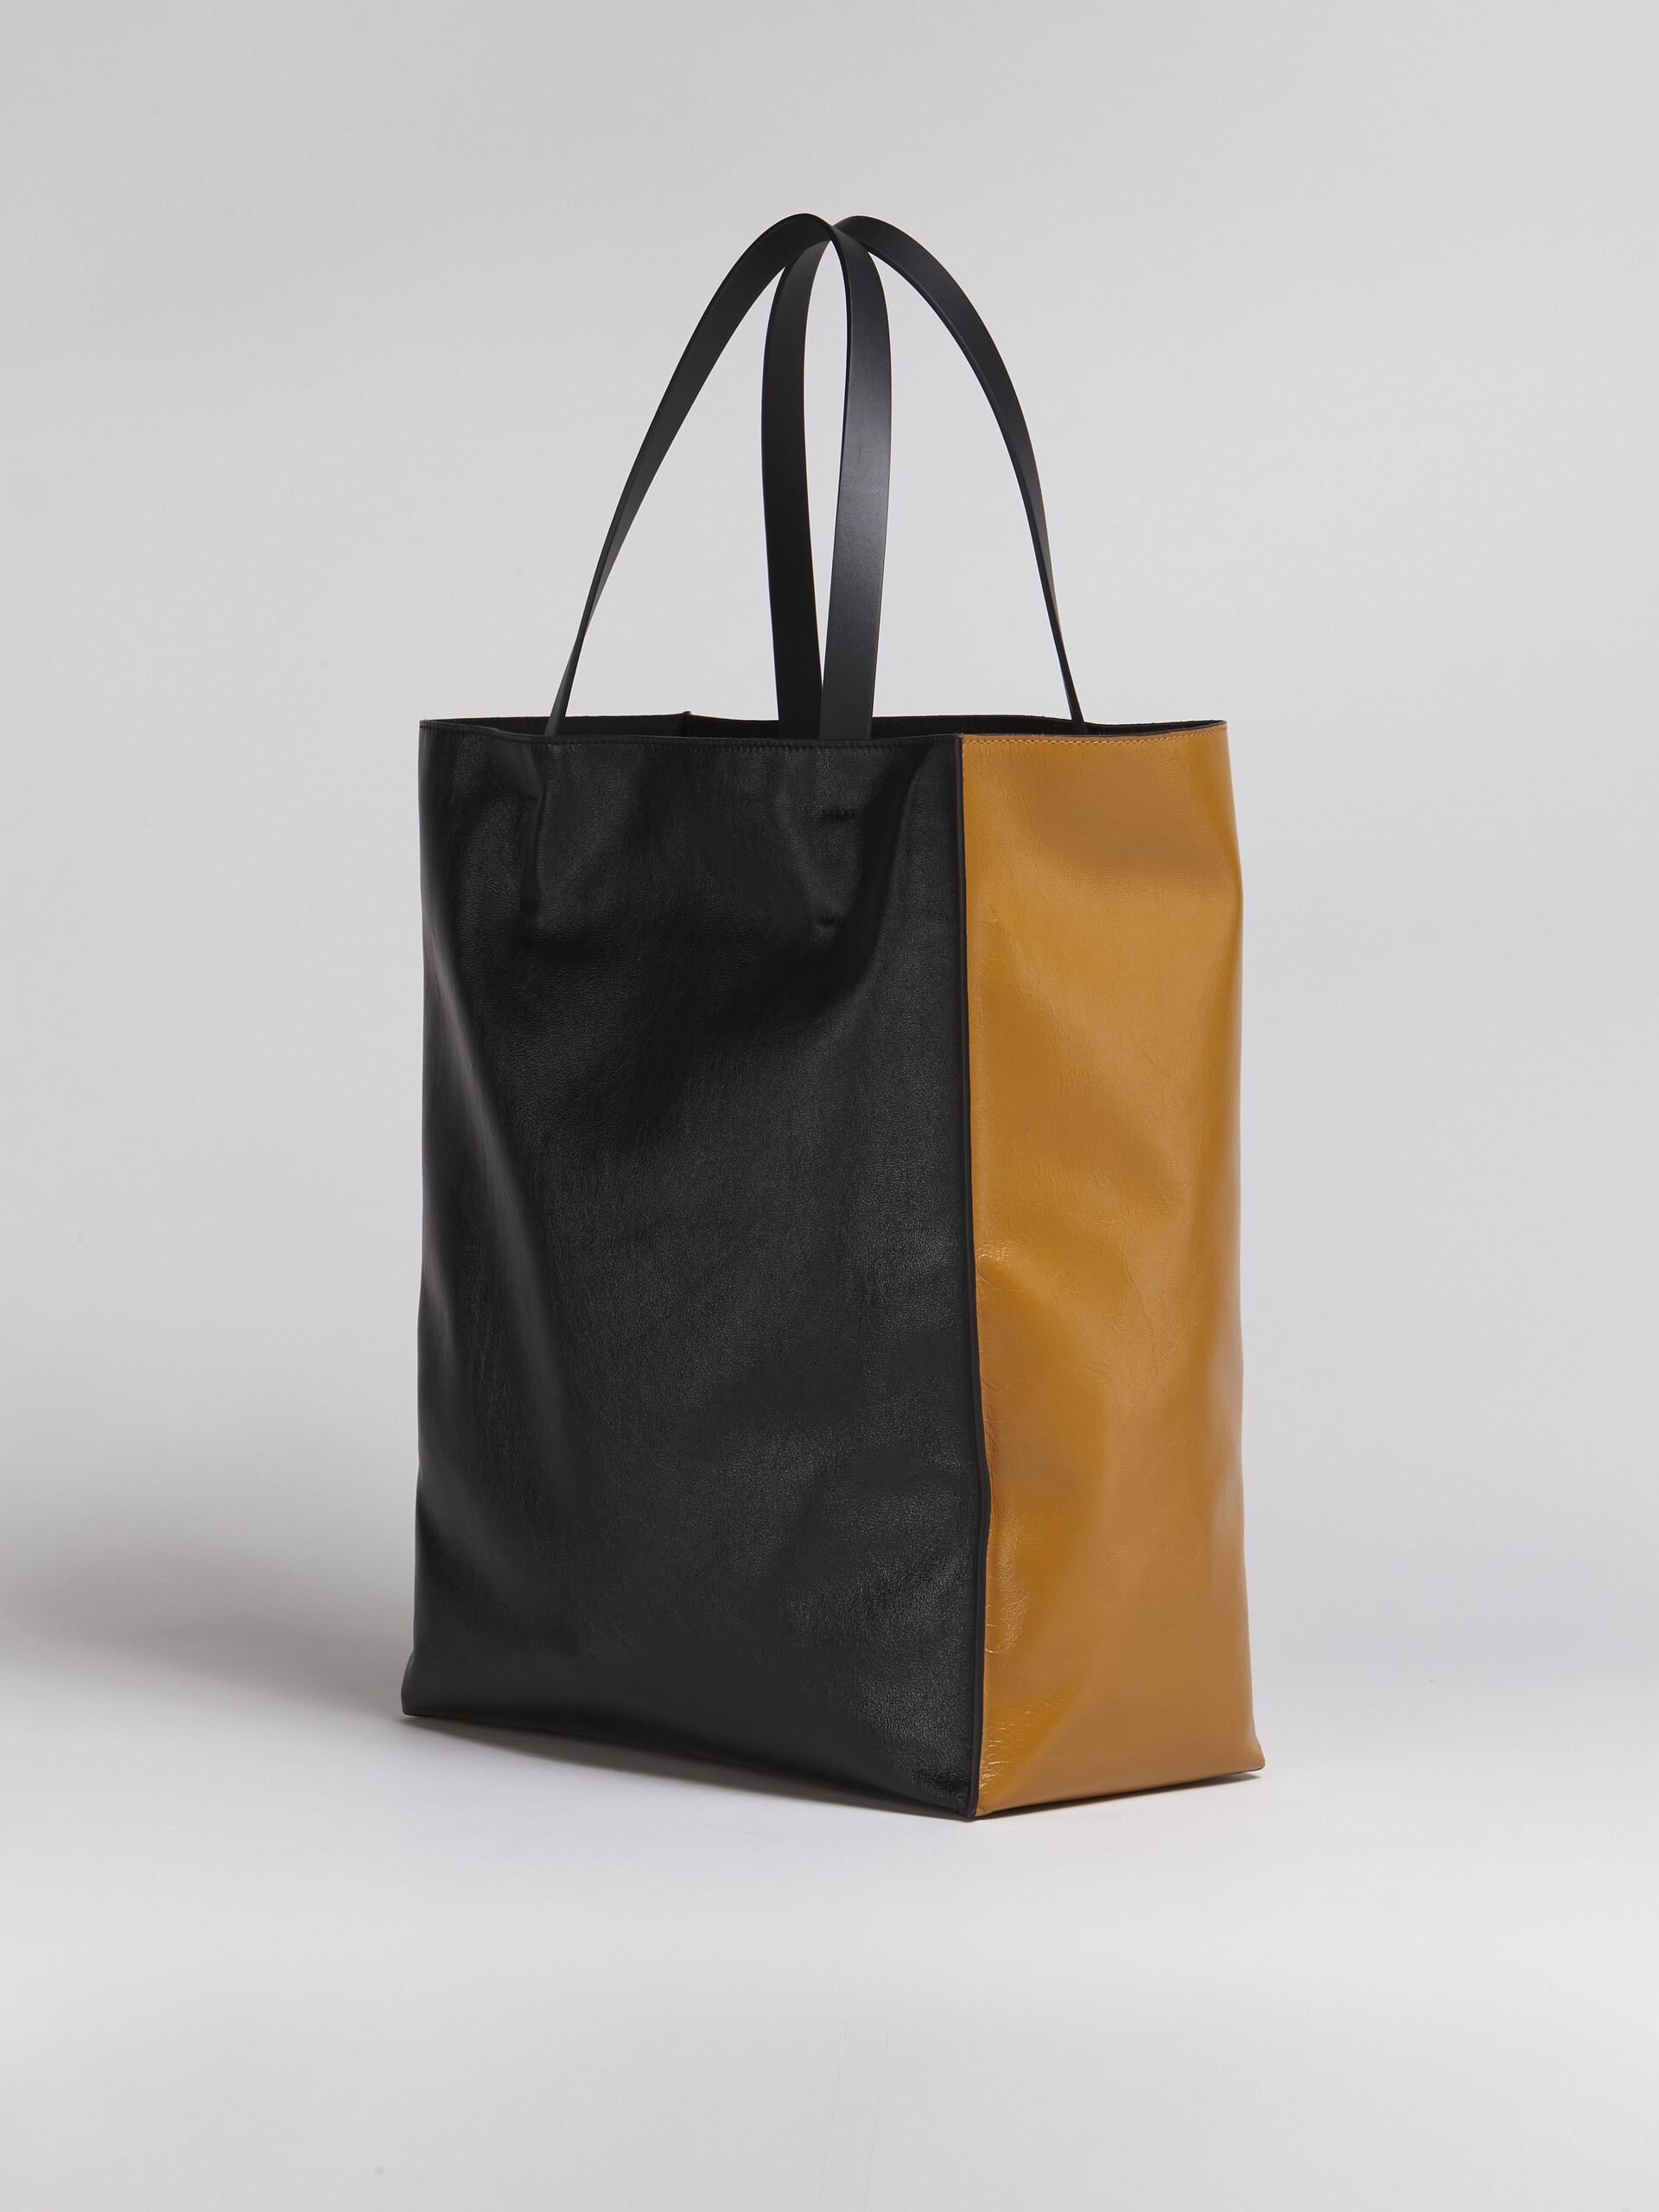 MUSEO SOFT bag in shiny brown and black leather - Shopping Bags - Image 2